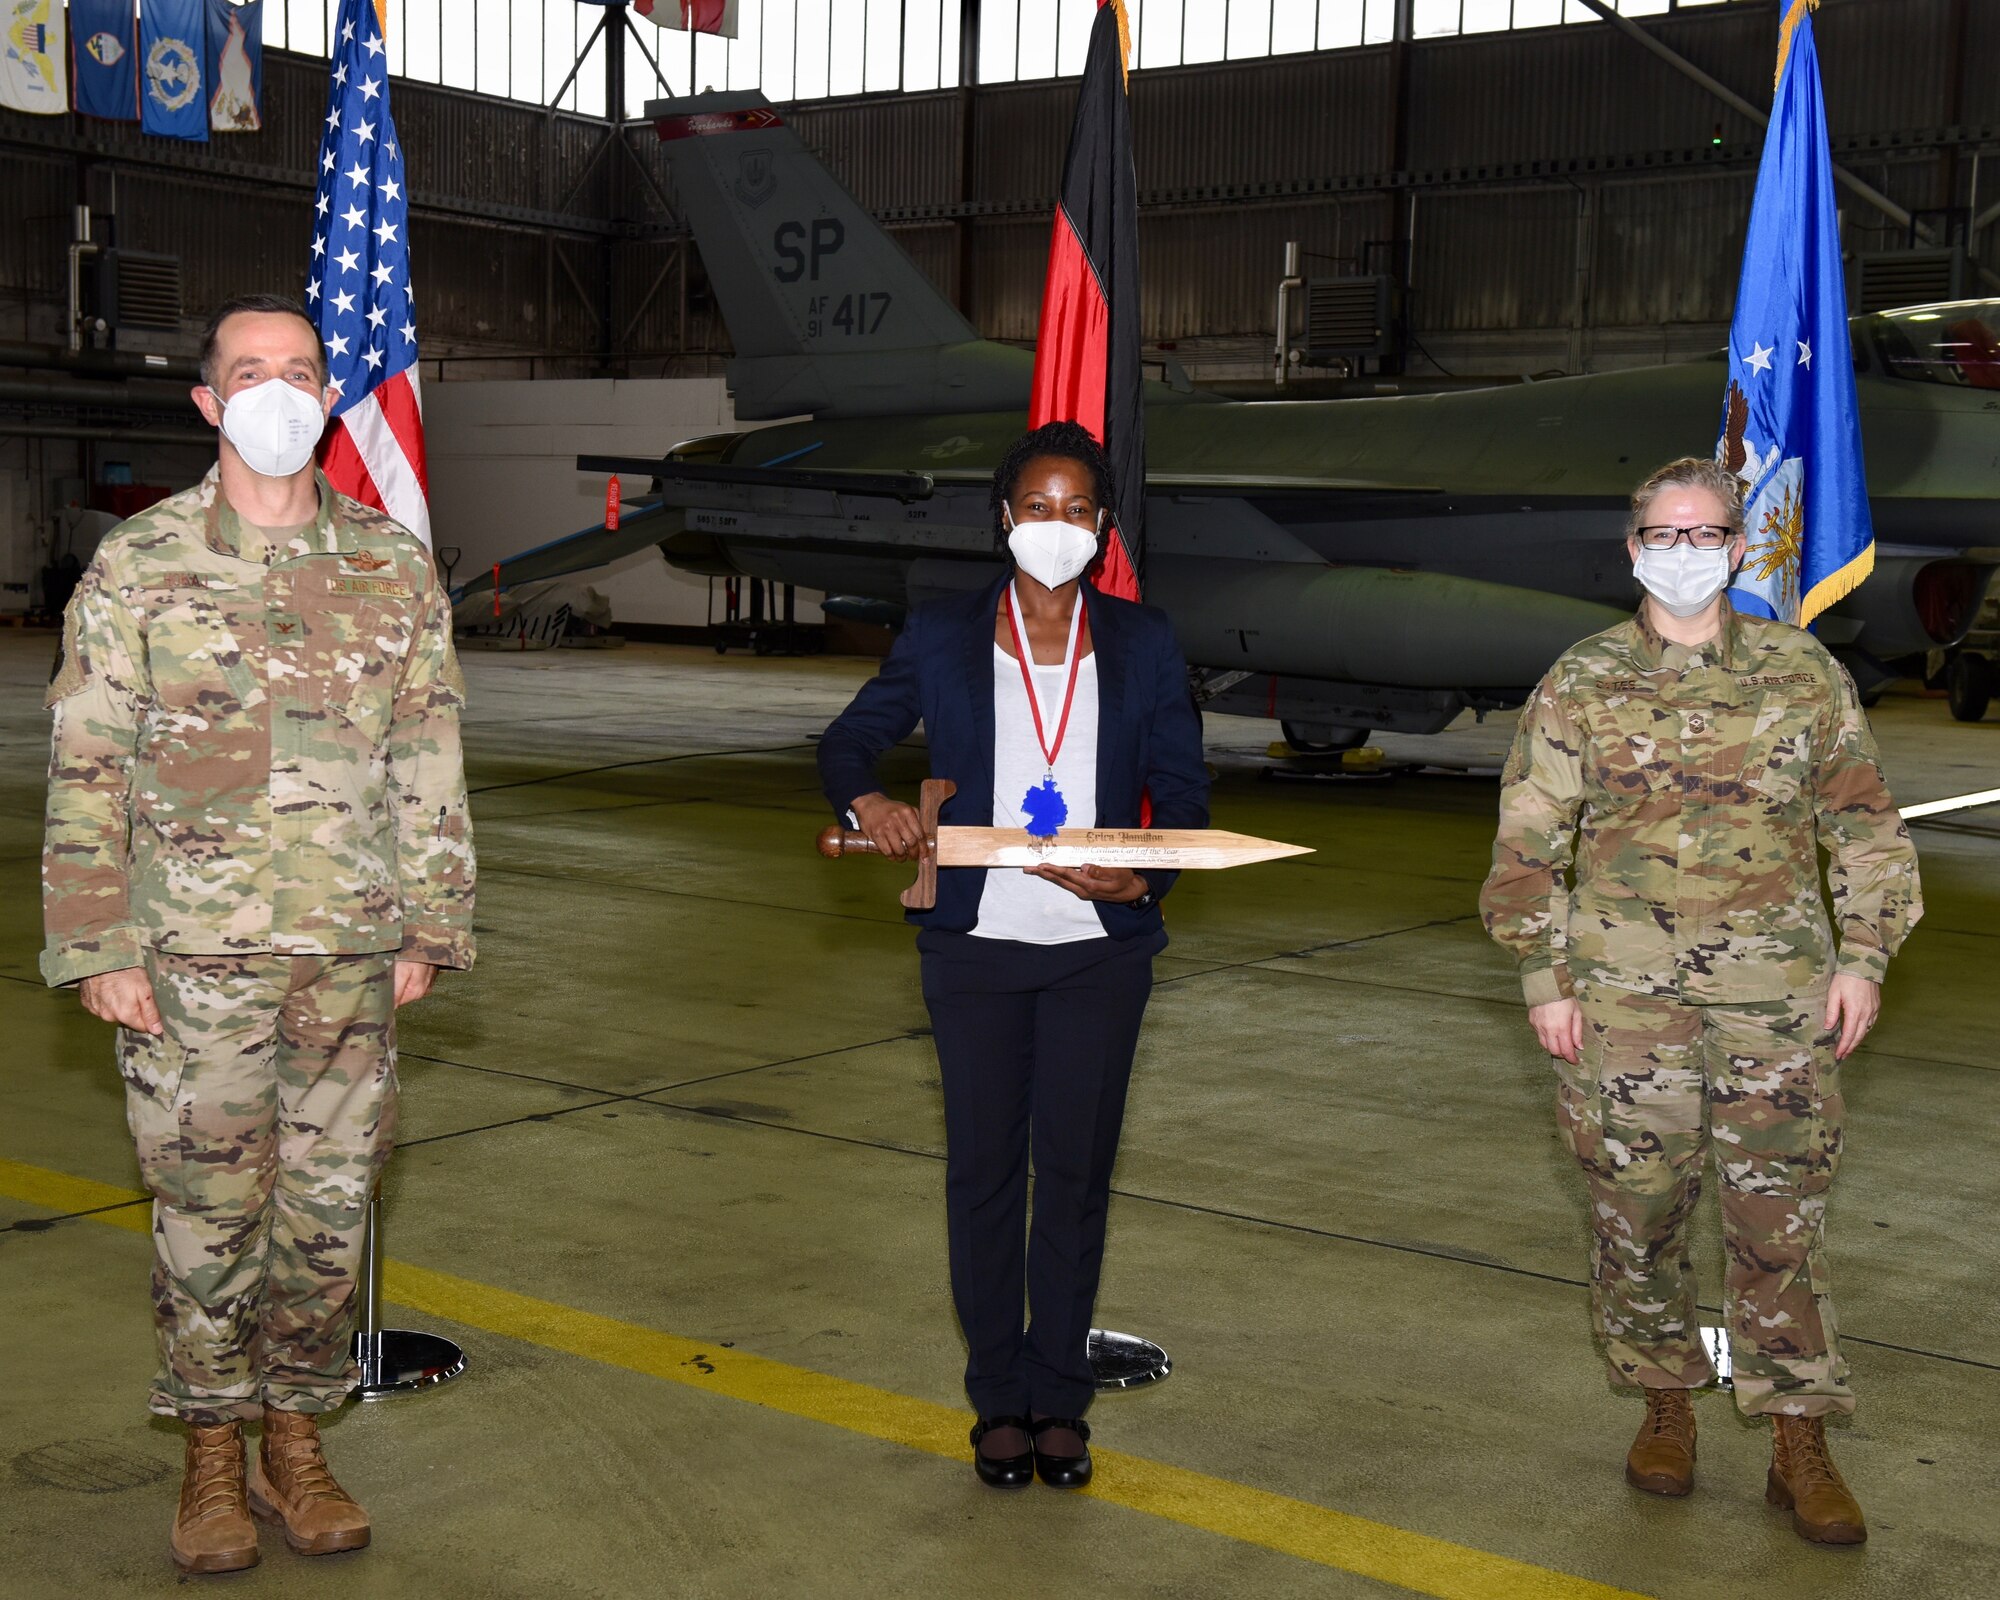 U.S. Air Force Col. Jason Hokaj, 52nd Fighter Wing vice commander (left), and Chief Master Sgt. Stephanie Cates, 52nd Fighter Wing command chief (right), give the Category One Civilian of the Year award to Erica Hamilton, 52nd Munitions Maintenance Group, Feb. 5, 2021, at Spangdahlem Air Base, Germany